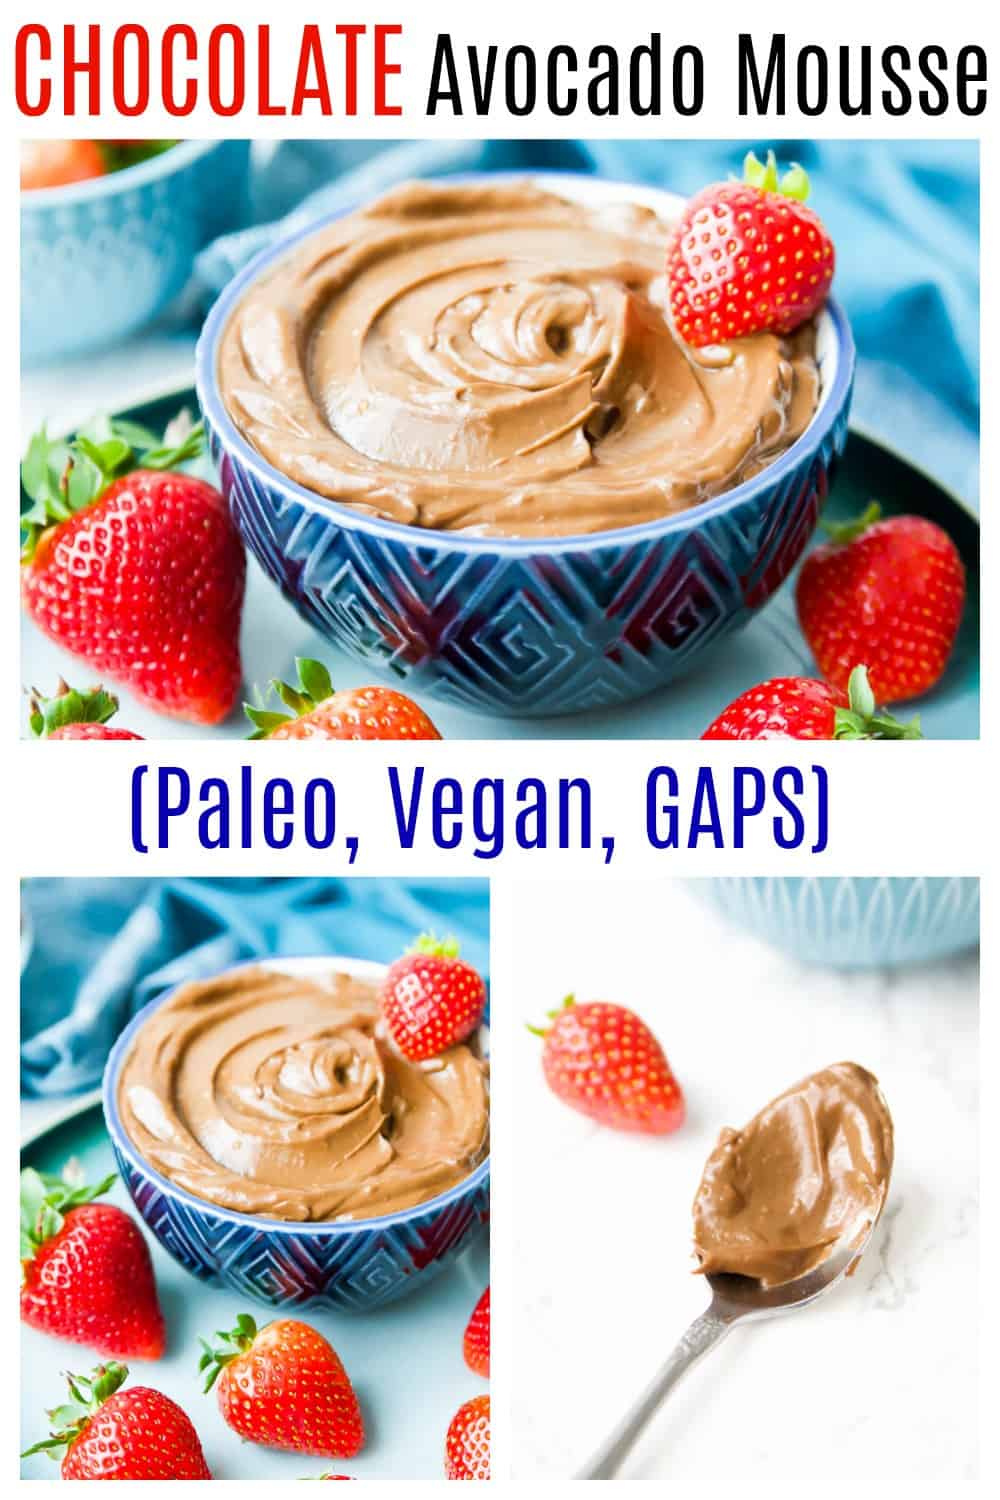 Chocolate Avocado Mousse. Doesn't that sound amazing? This chocolate mousse is very easy to make and is also vegan. Serve this chocolate avocado mousse as a quick and healthy dessert at your next party and I promise your guests will leave happy. #paleo #mousse #chocolate #avocado #vegan #dairyfree